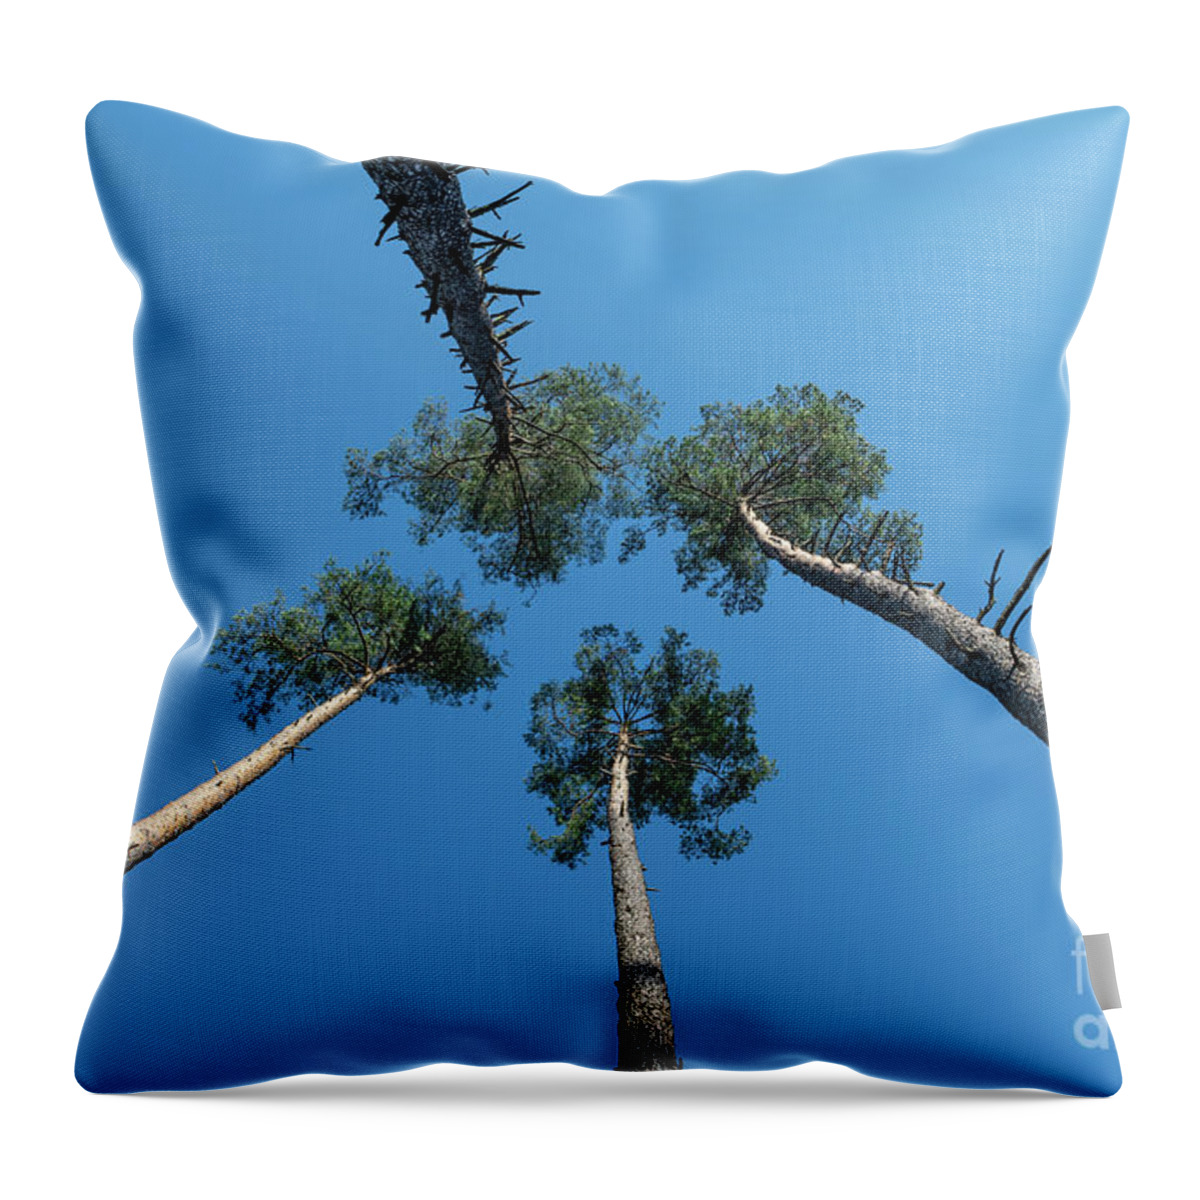 Tree Throw Pillow featuring the photograph Canopies And Stems Of Four High Conifers Growing Close Together To The Blue Sky by Andreas Berthold